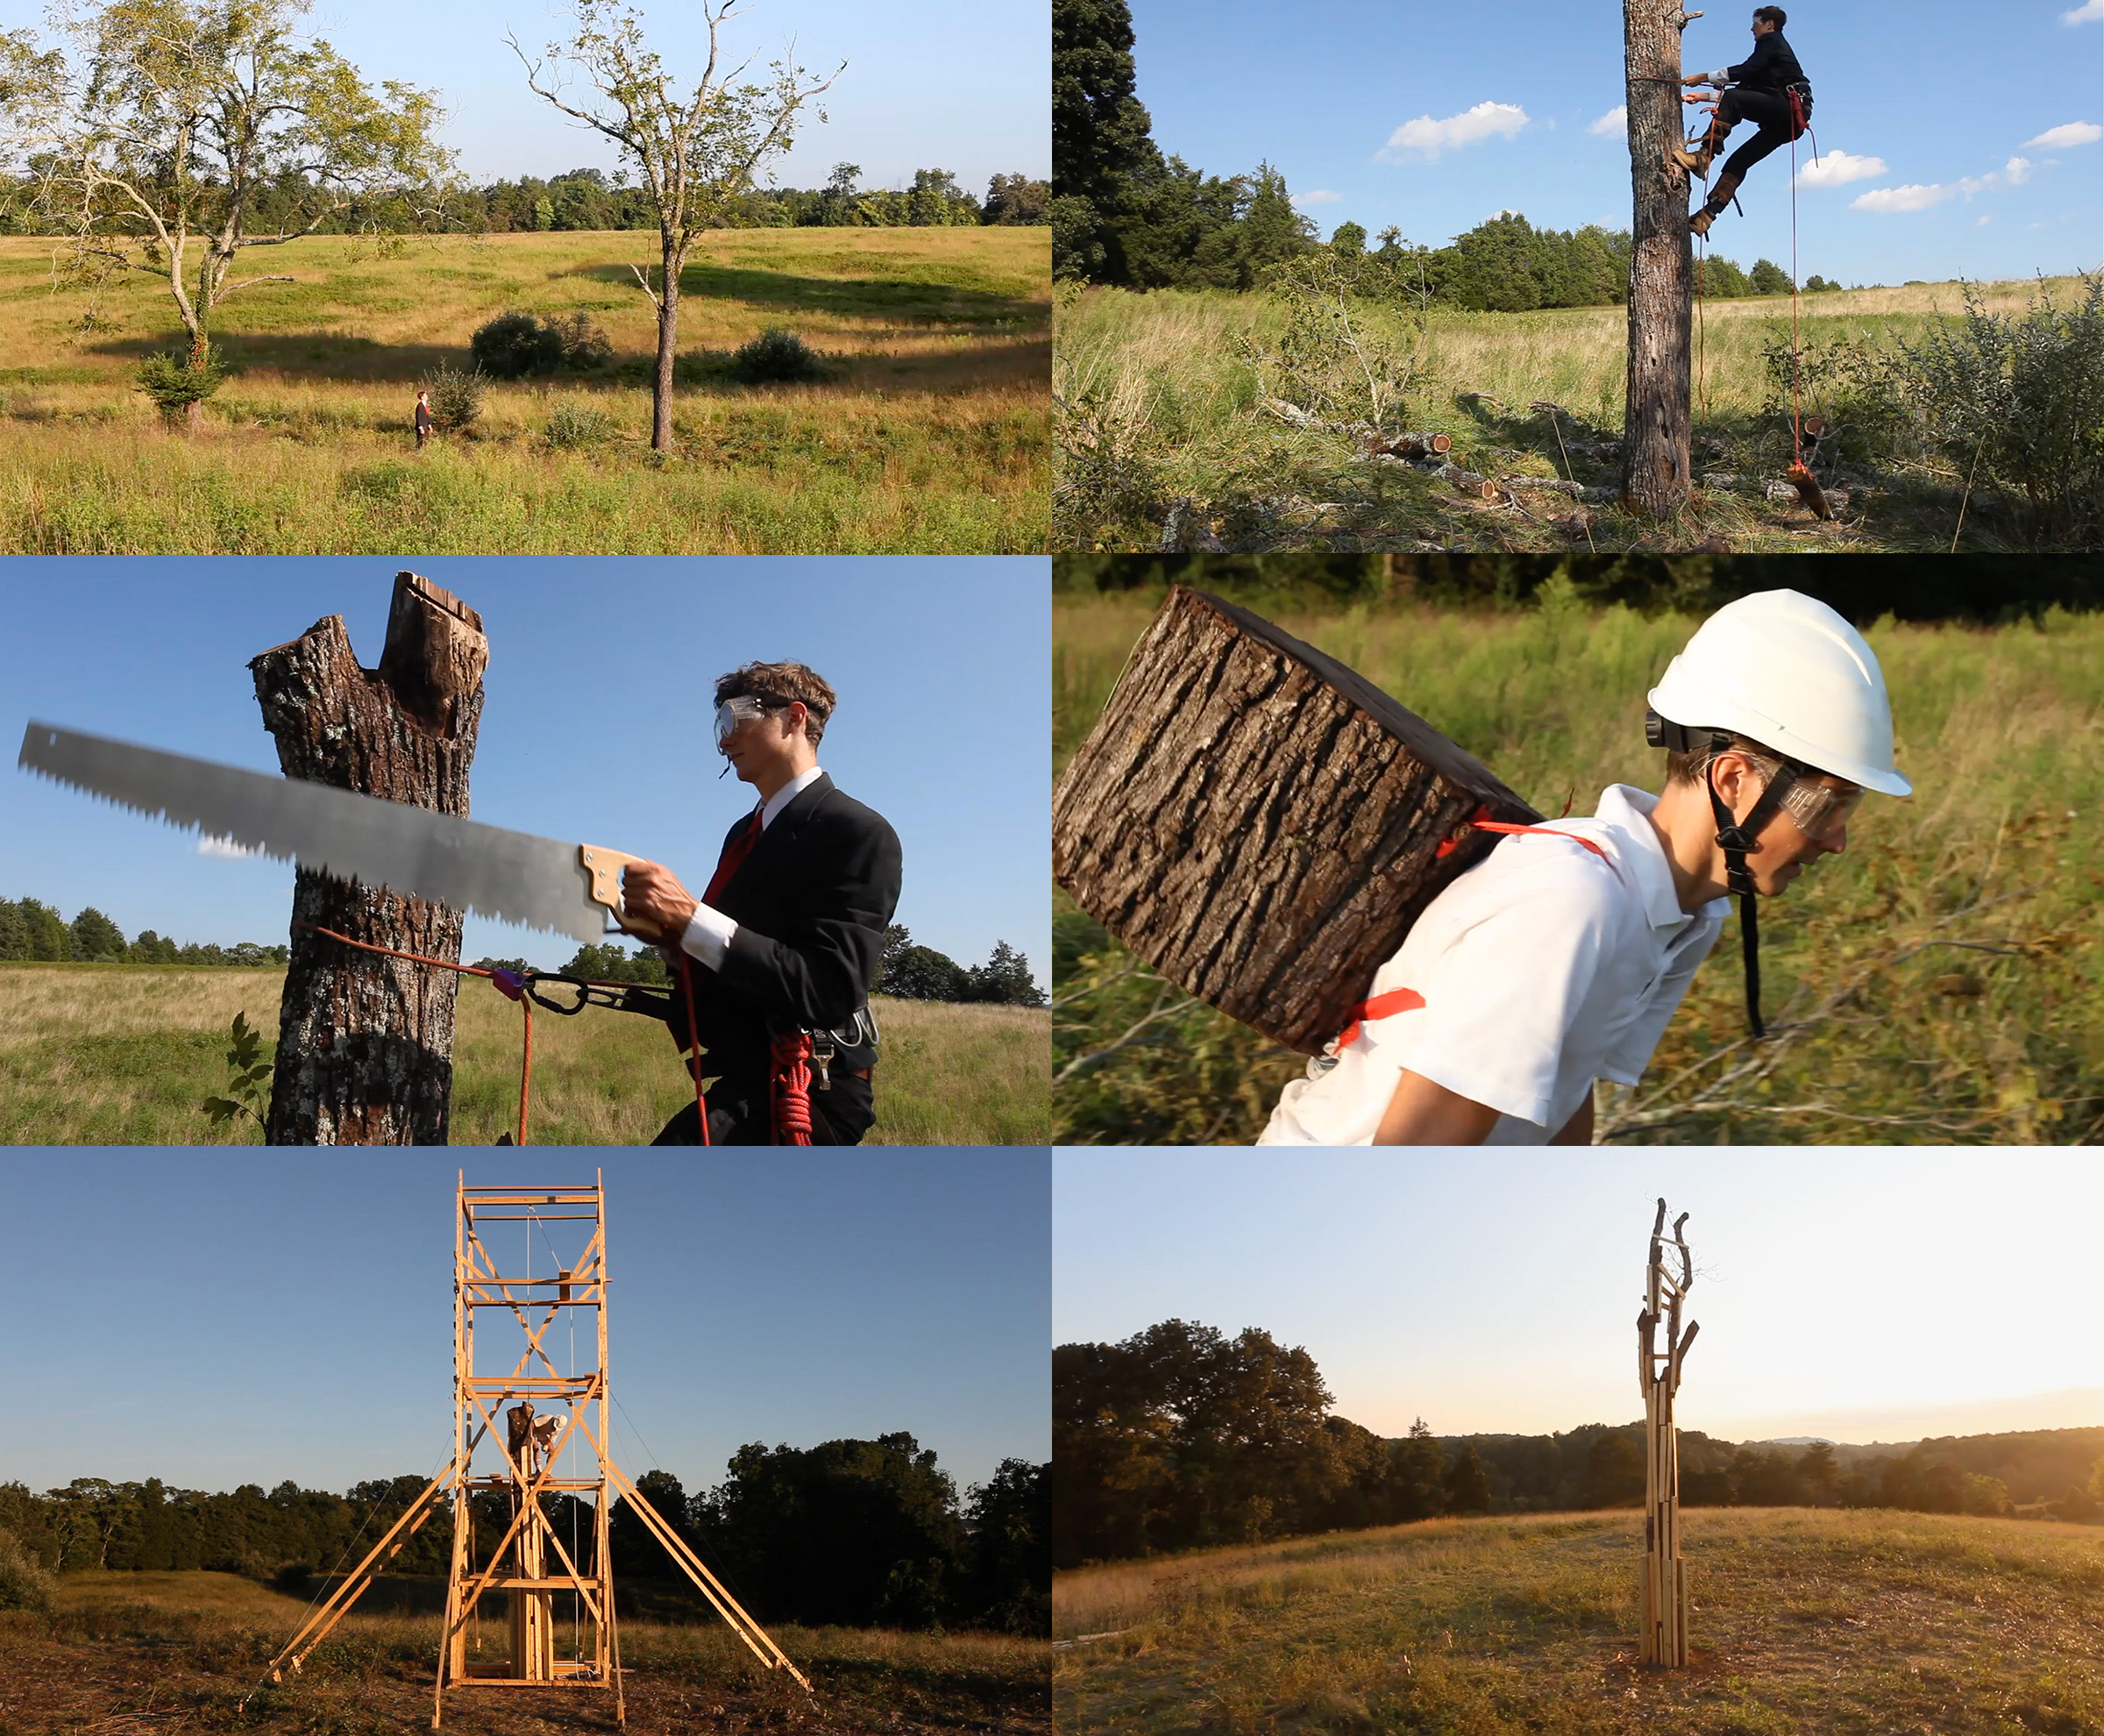 A grid of six photographs showing a person cutting down a tree in a field